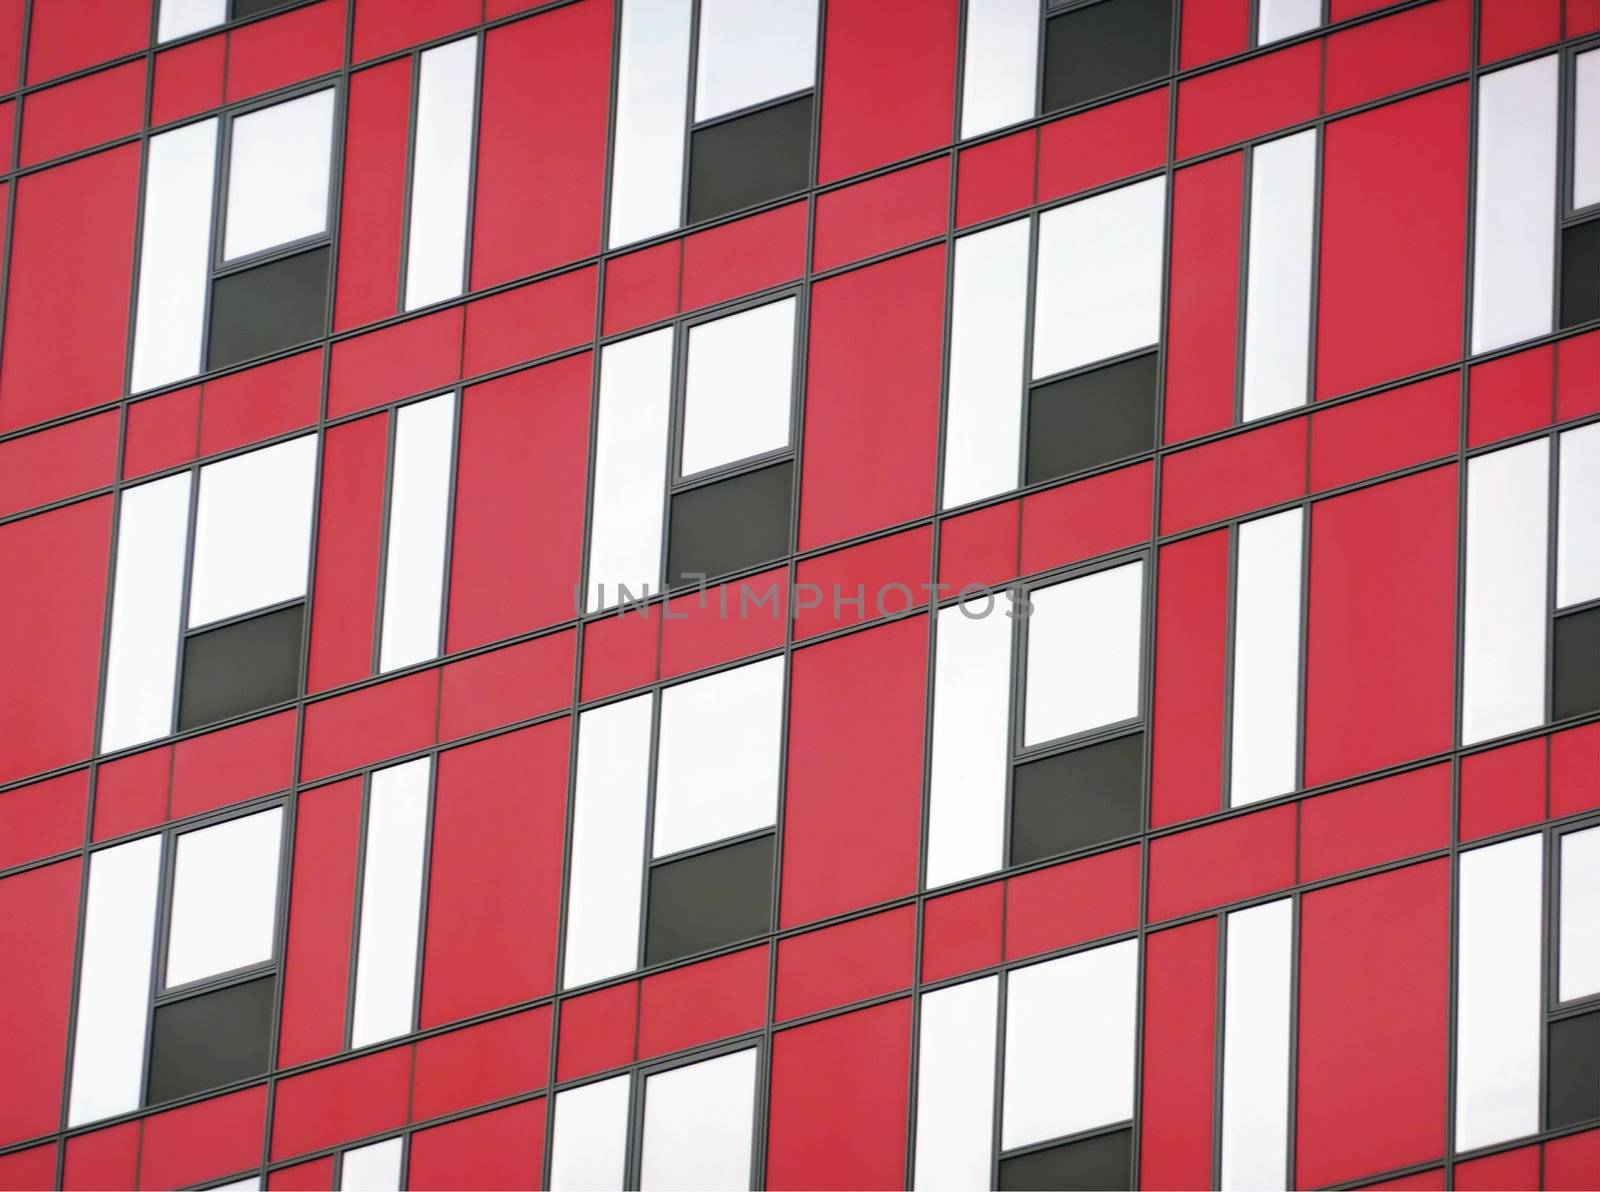 Red and black facade by magraphics